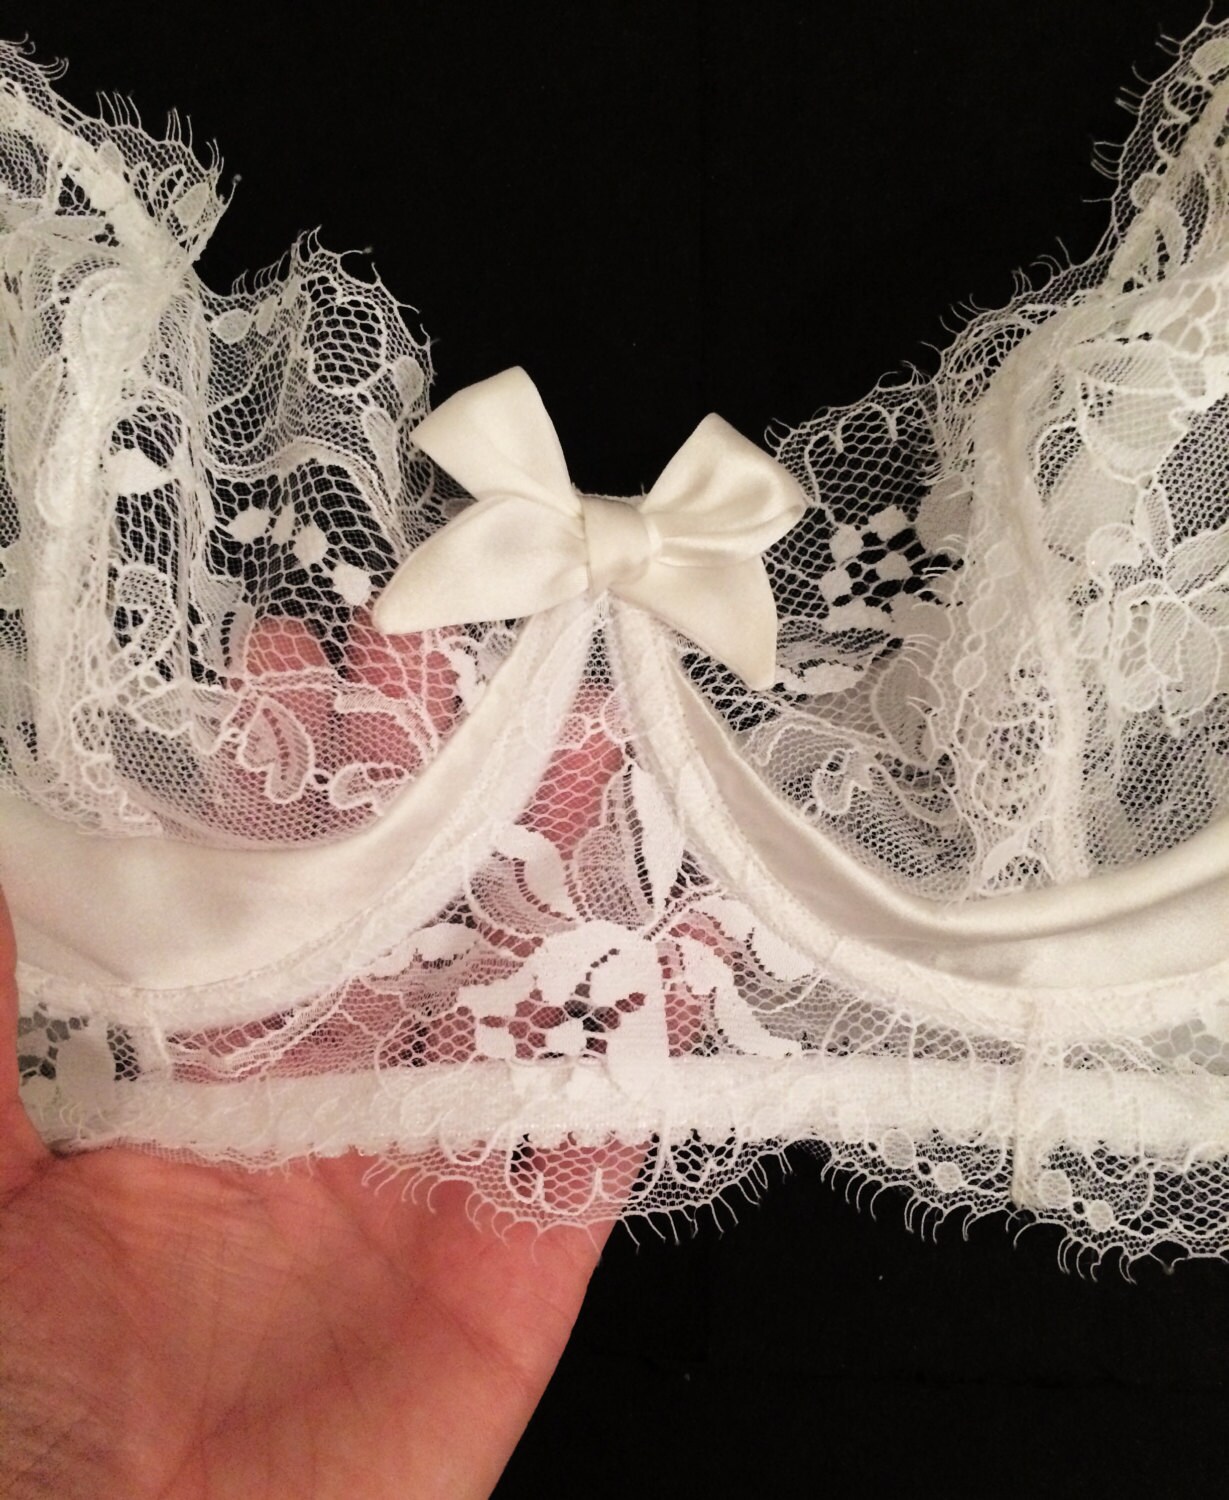 White lace bra in french calais lace nude lining - Marianna Giordana Paris